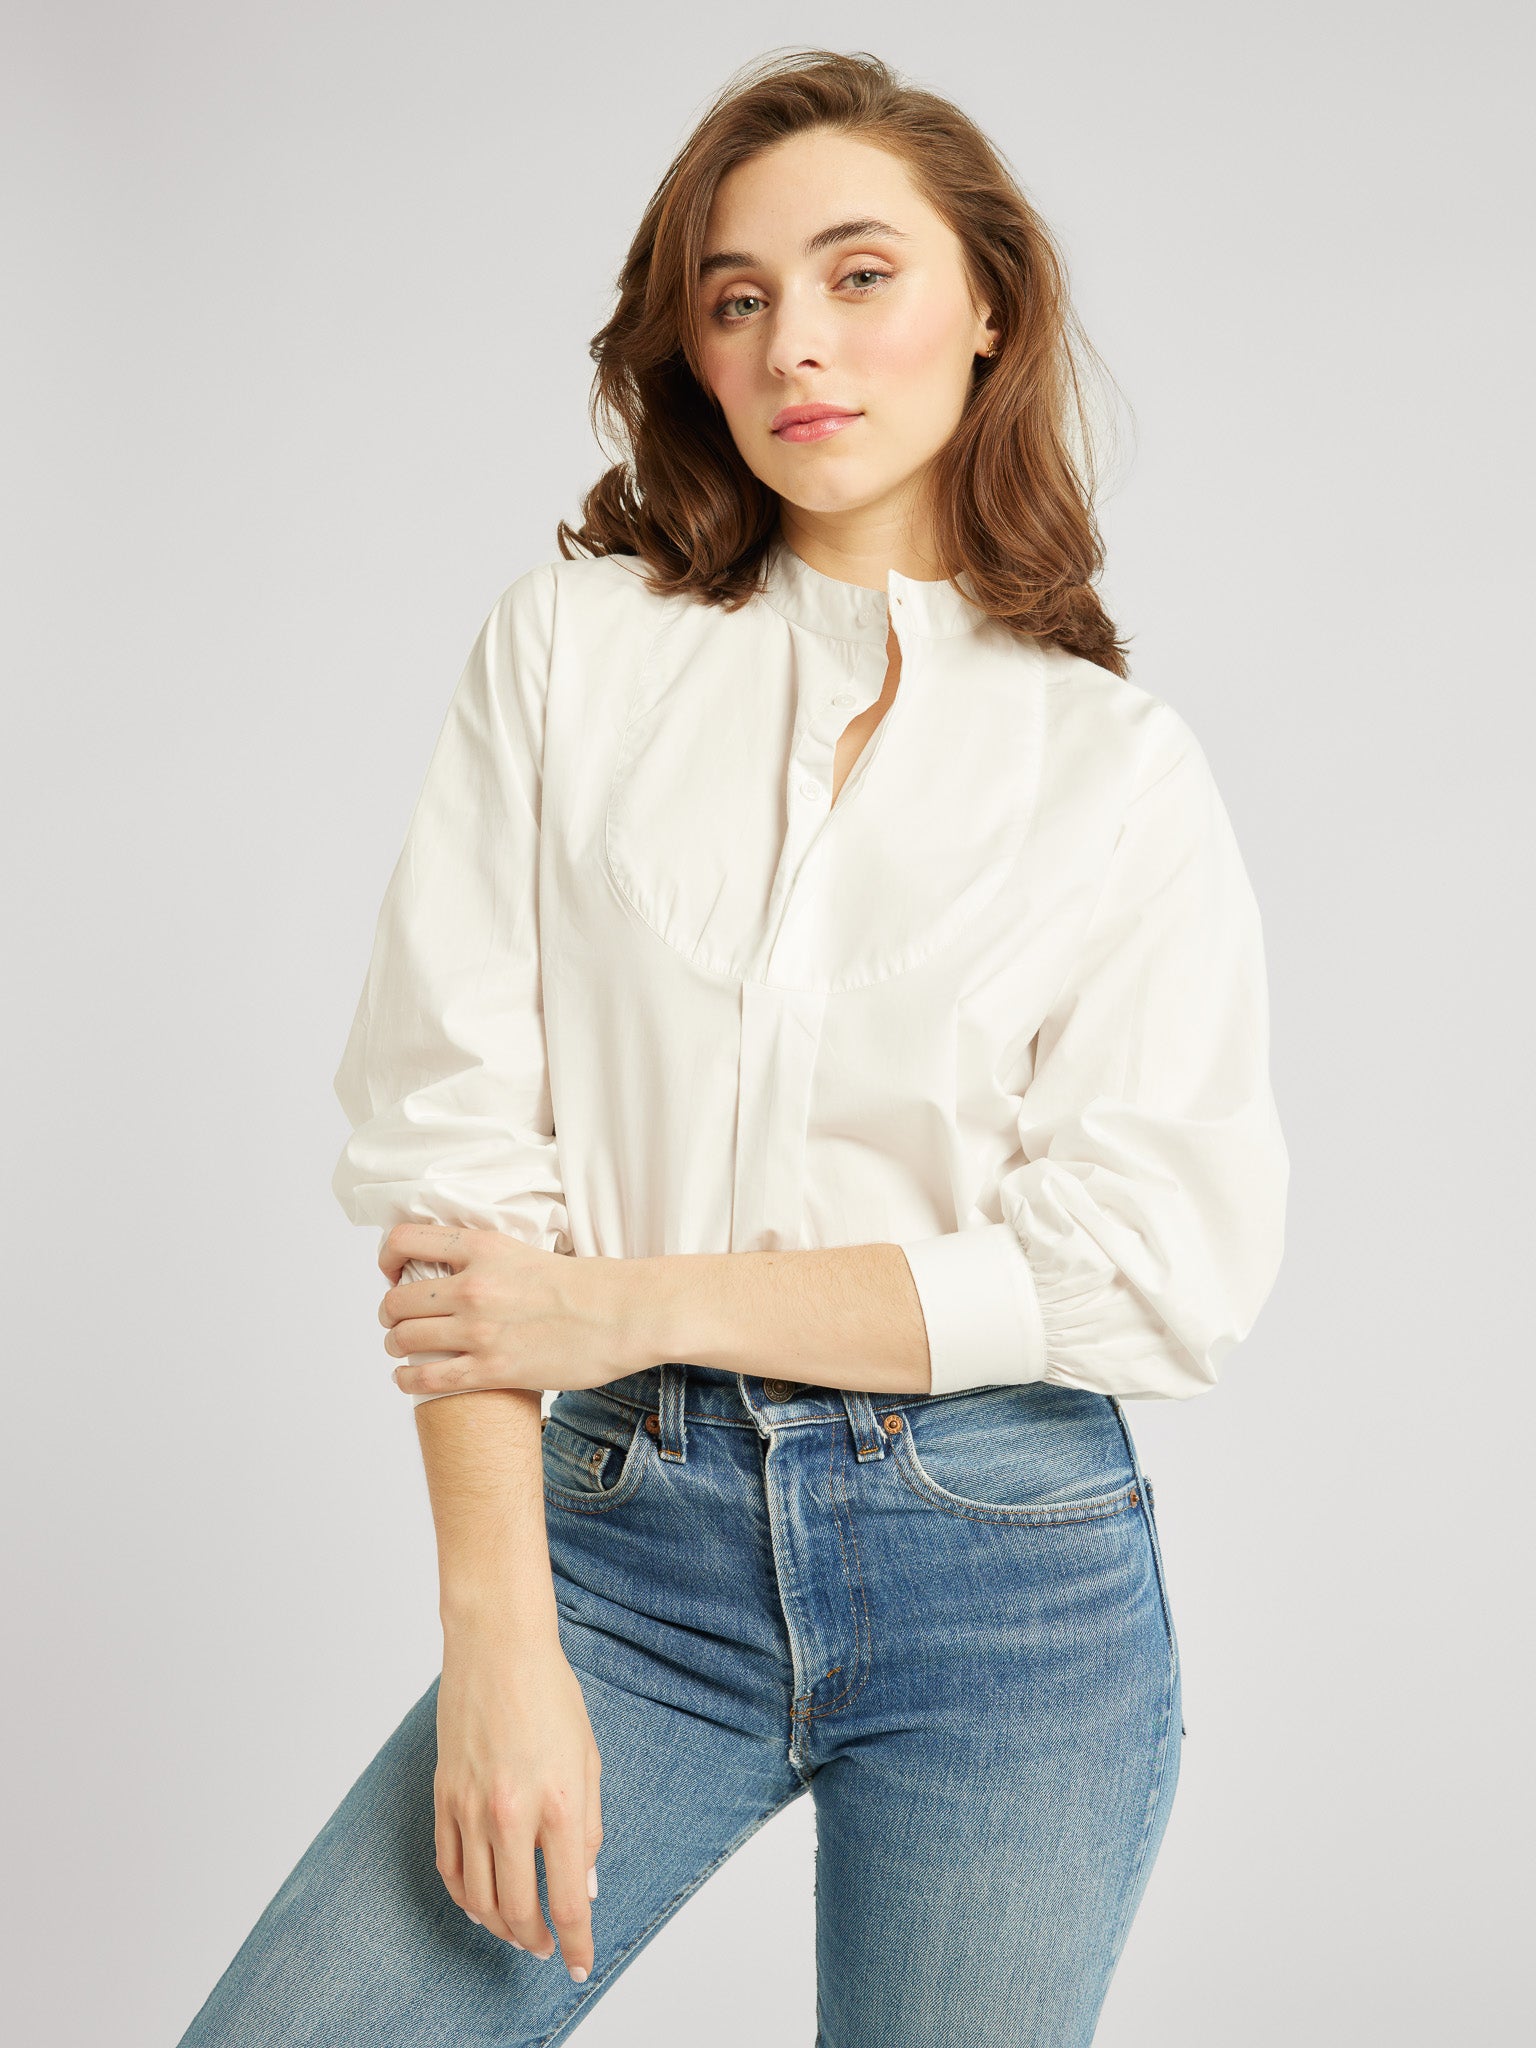 MILLE Clothing Tilda Top in White